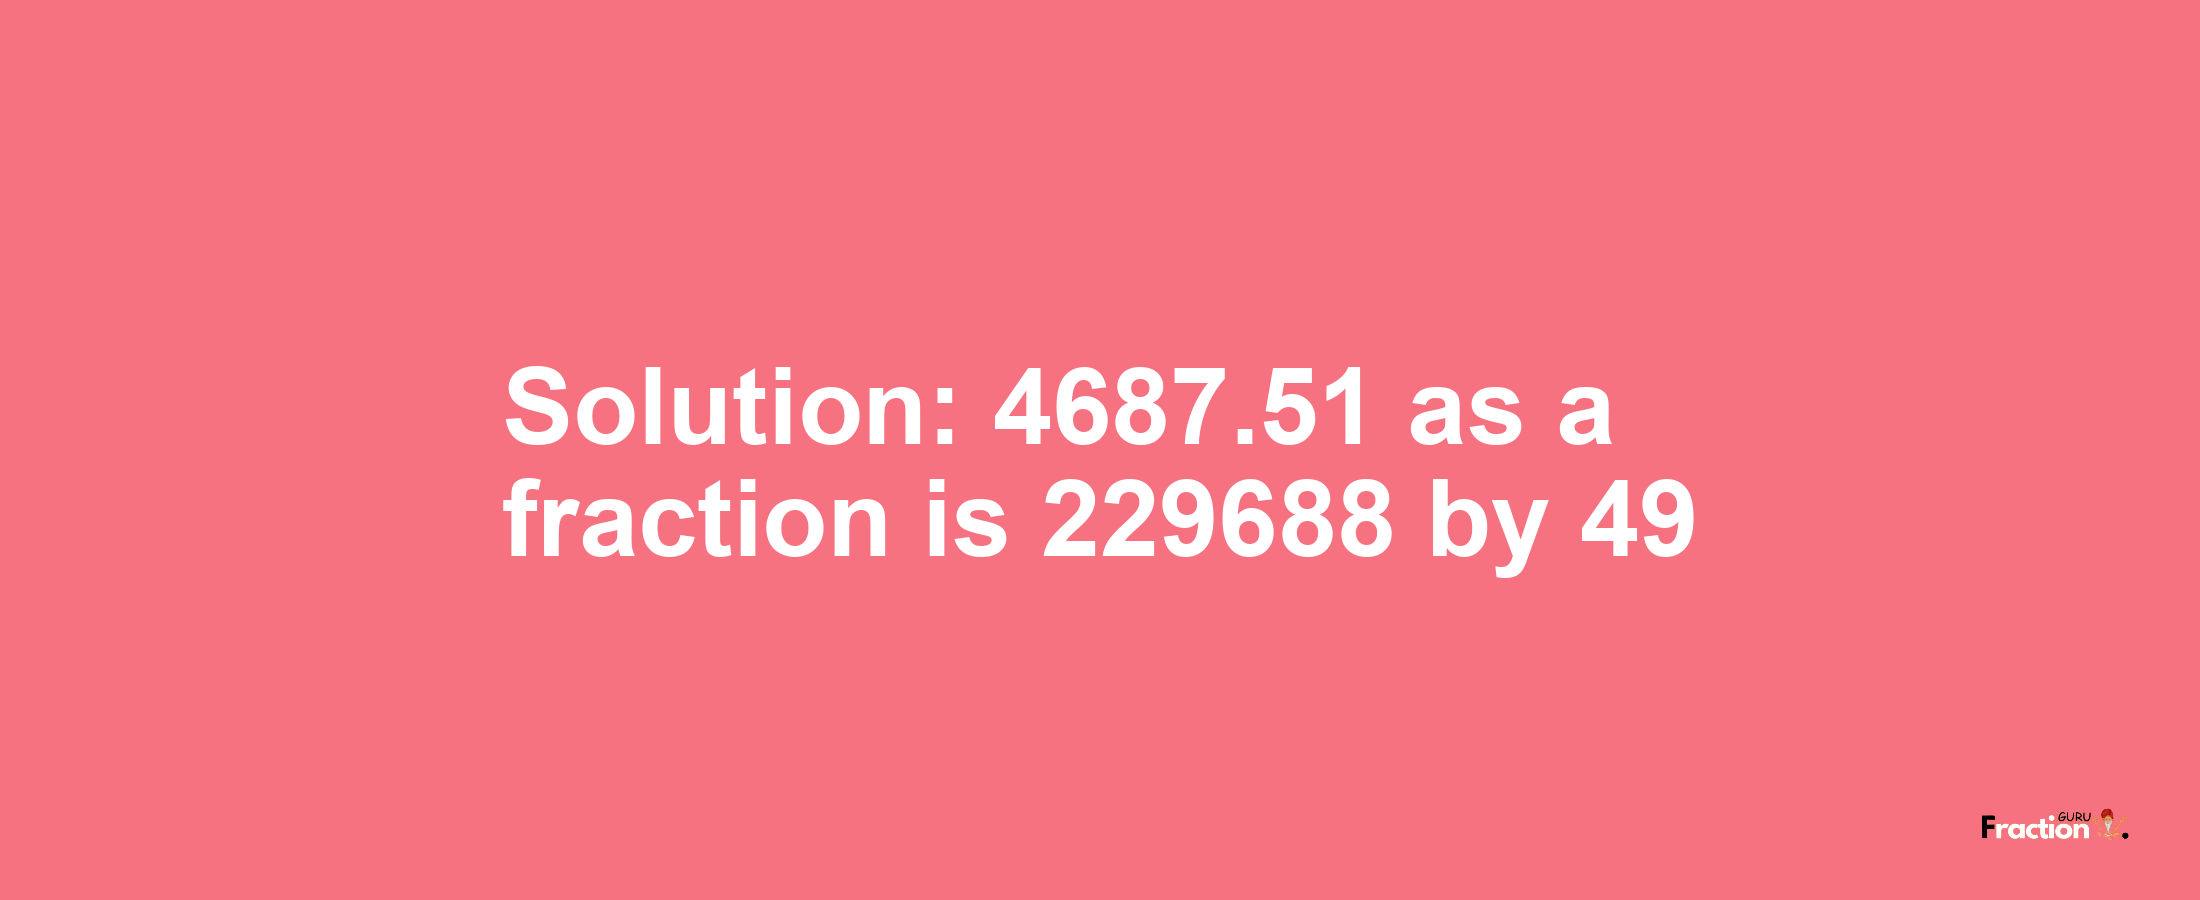 Solution:4687.51 as a fraction is 229688/49